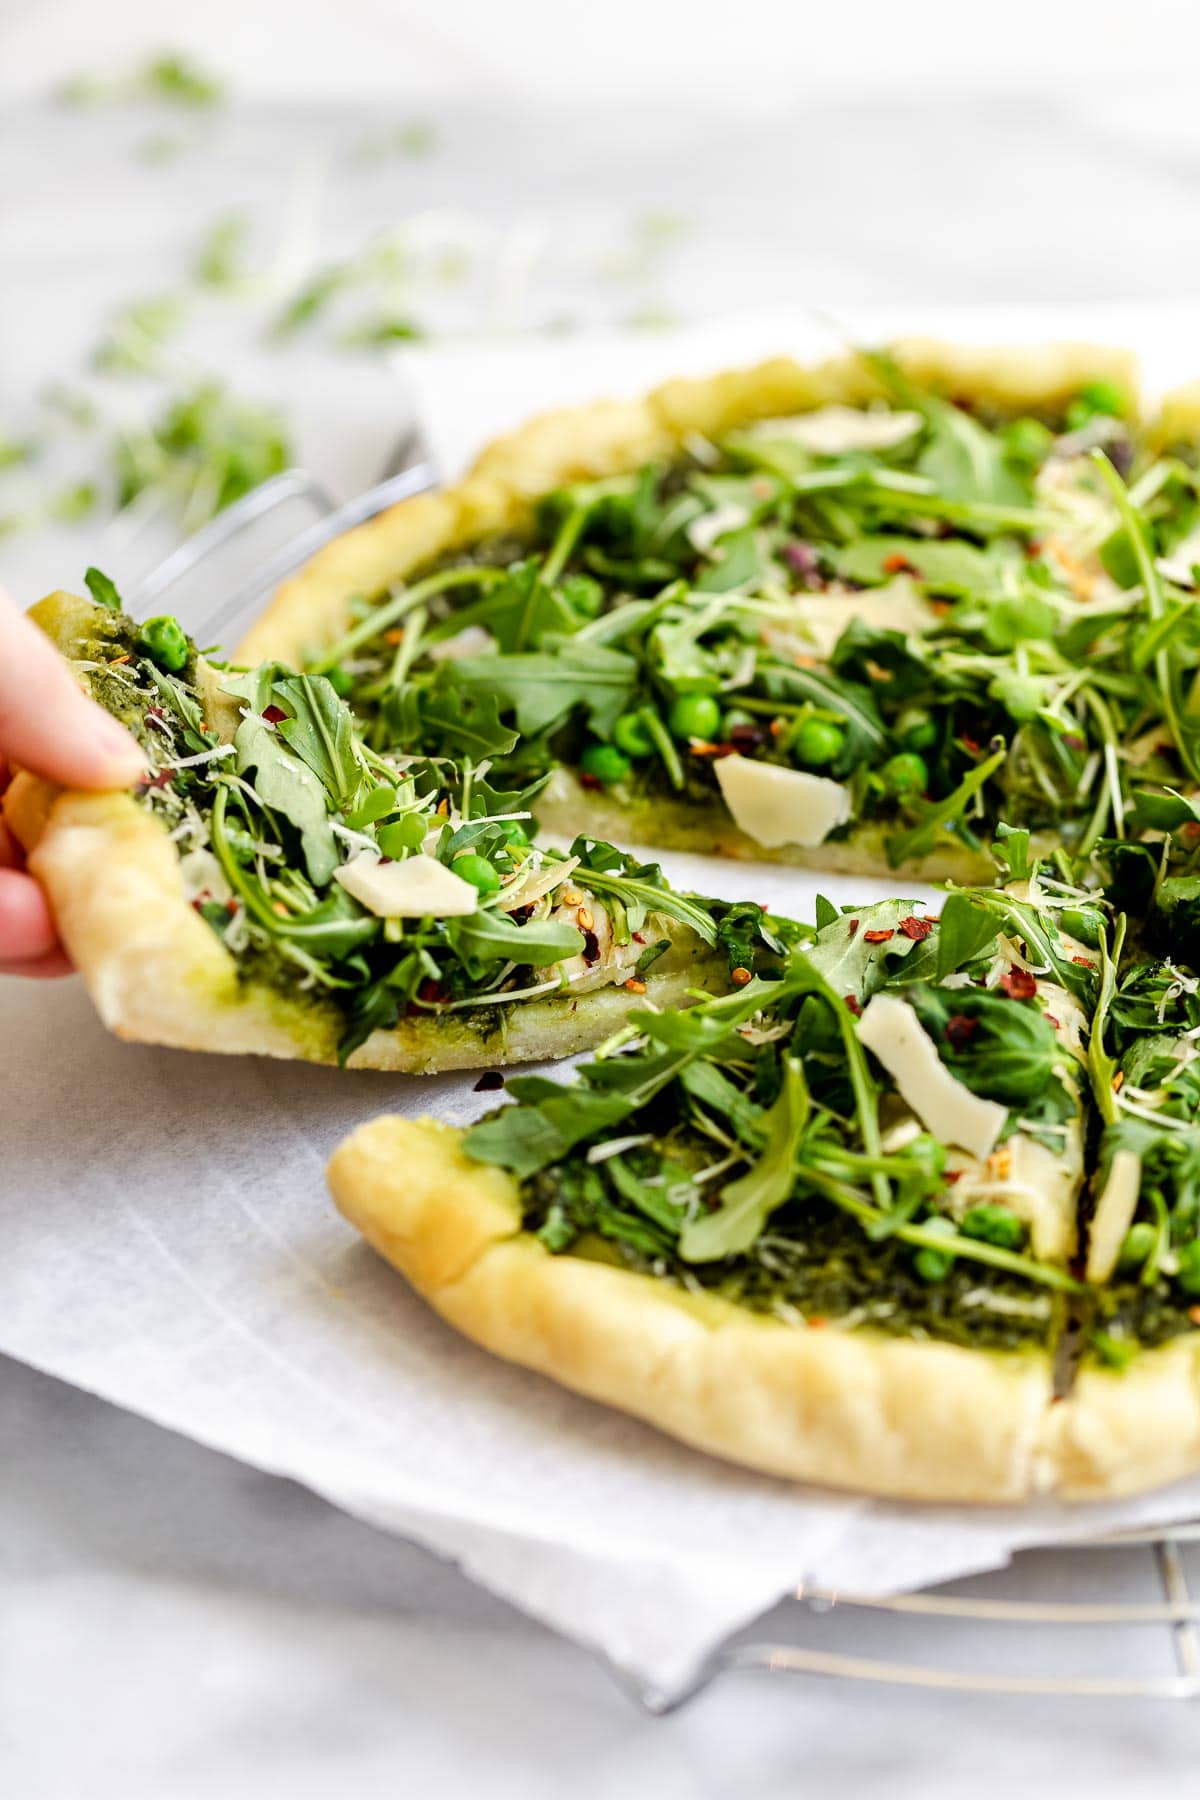 gluten free pizza topped with pesto and arugula